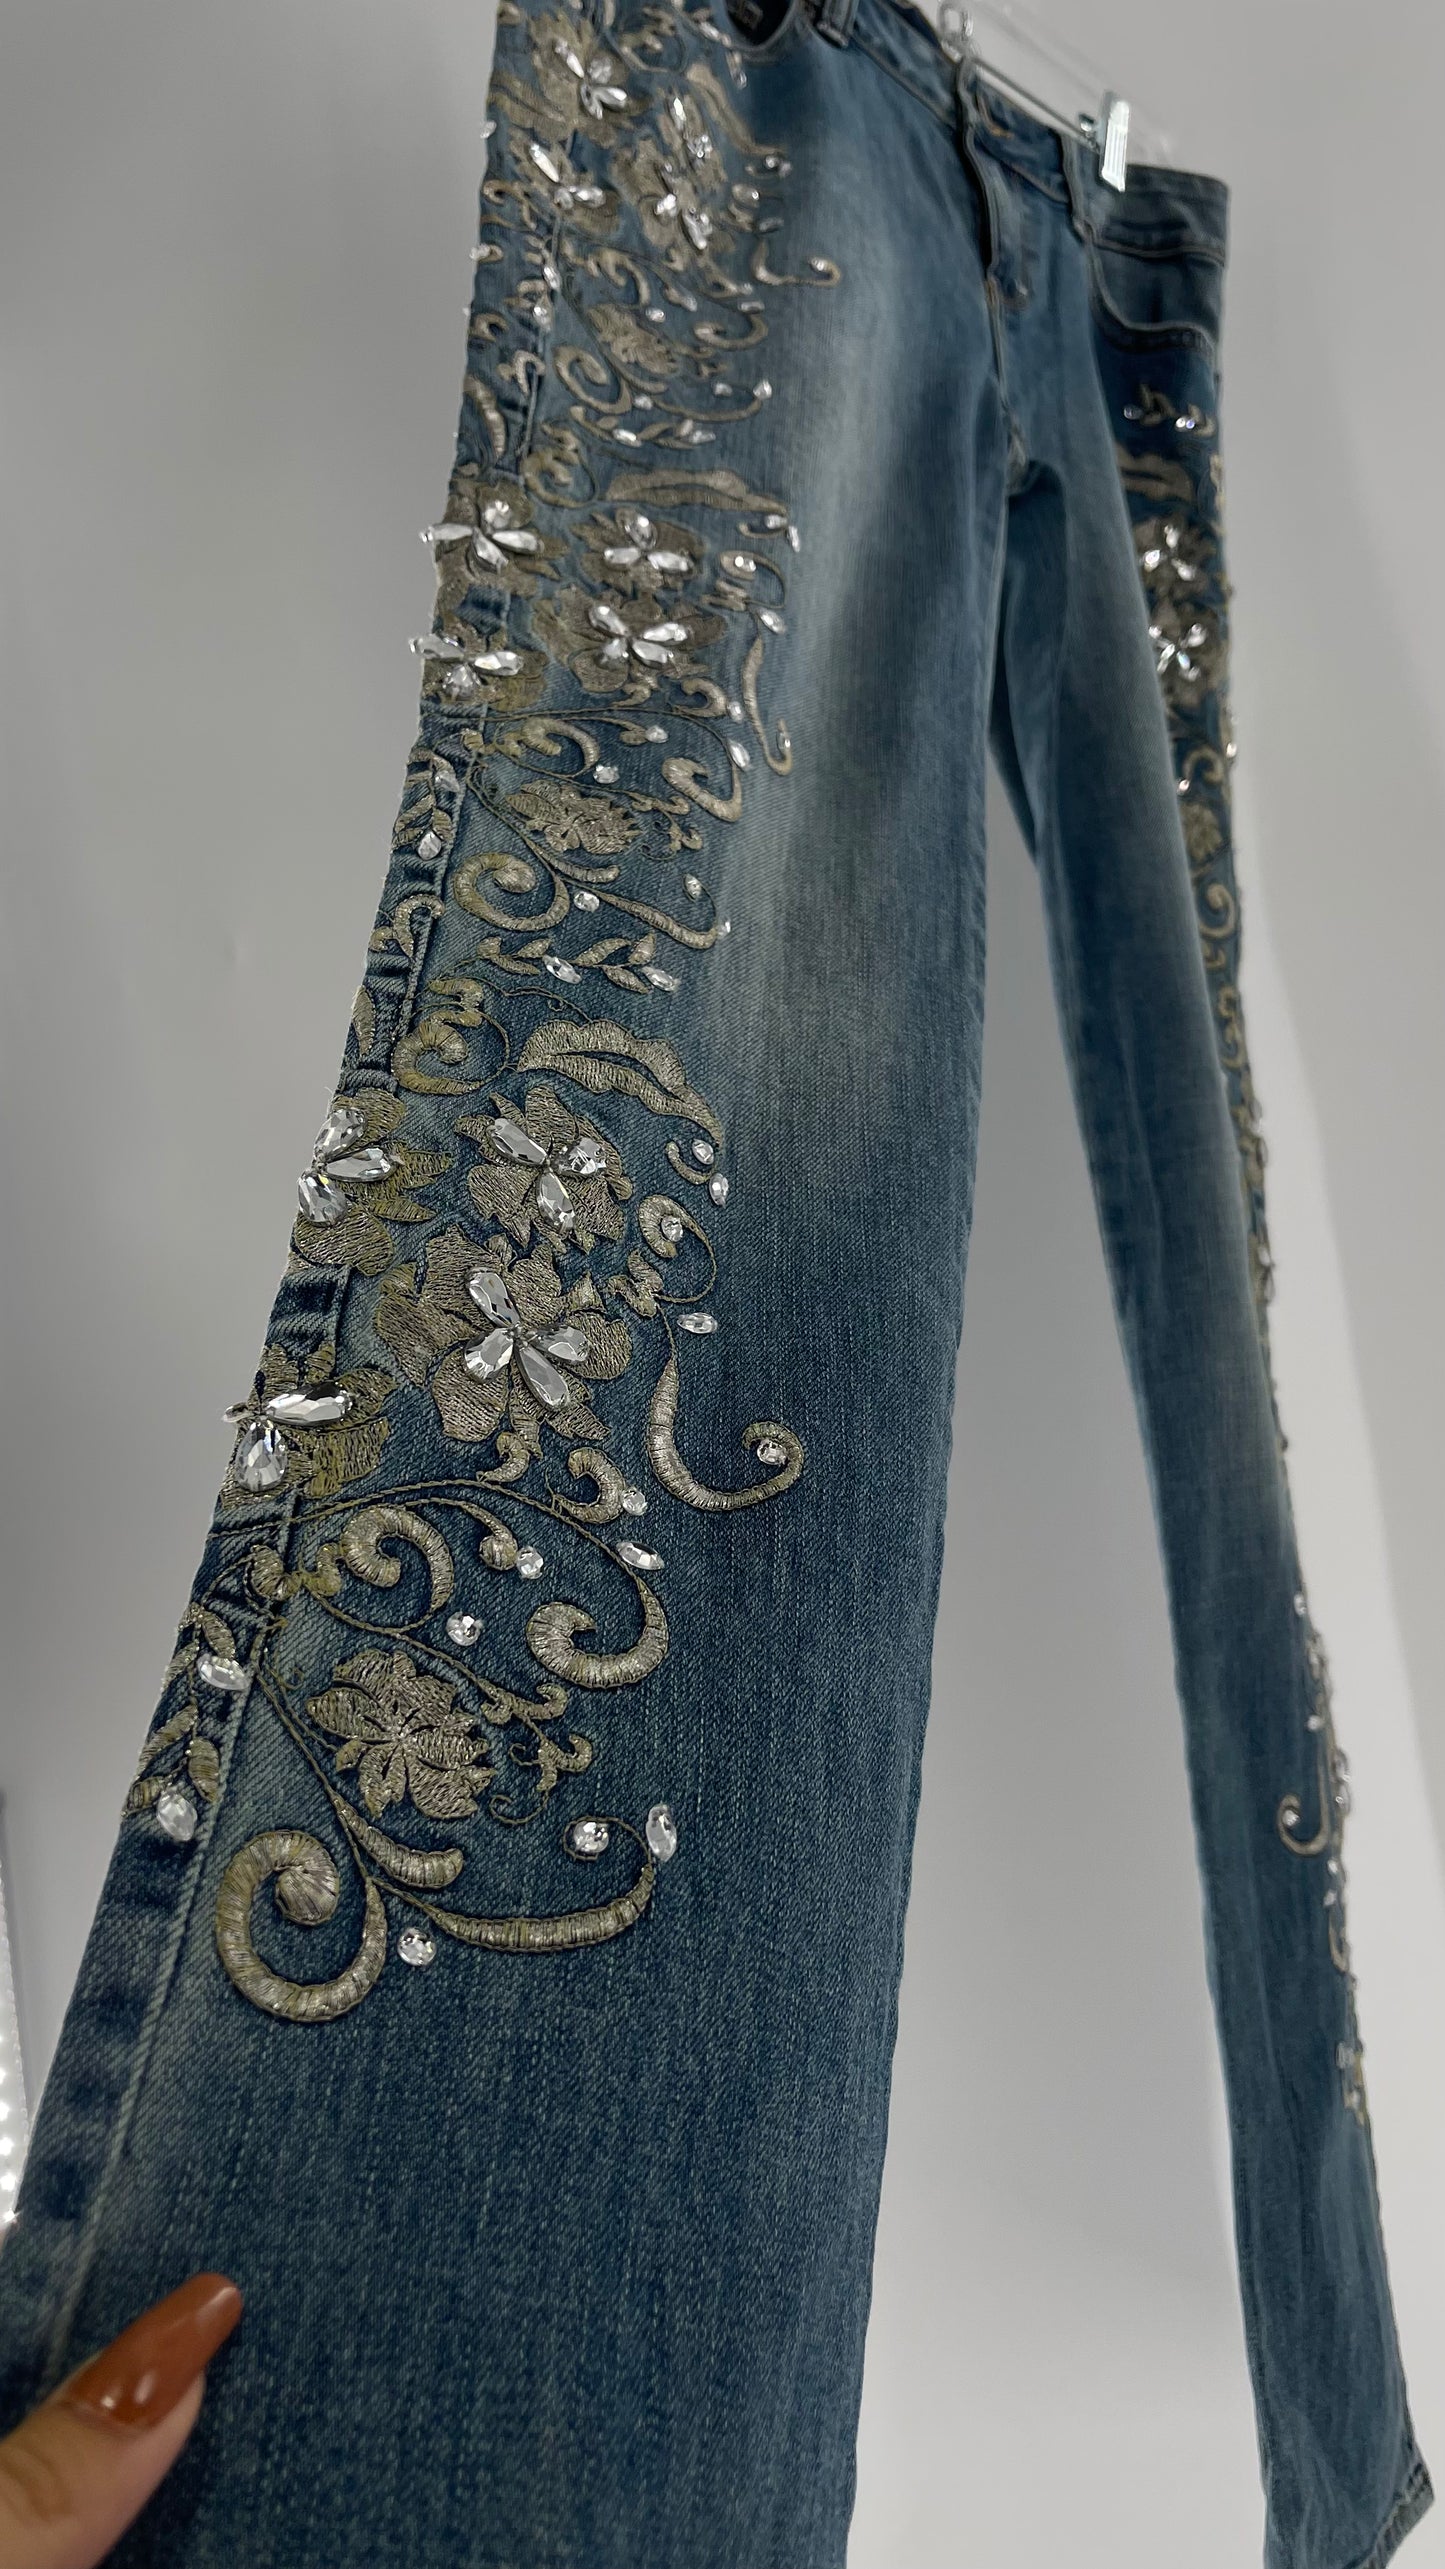 Jean London Jean Light Wash Waist Band to Hem Outer Leg Silver Embroidery with Crystal Rhinestones (6)